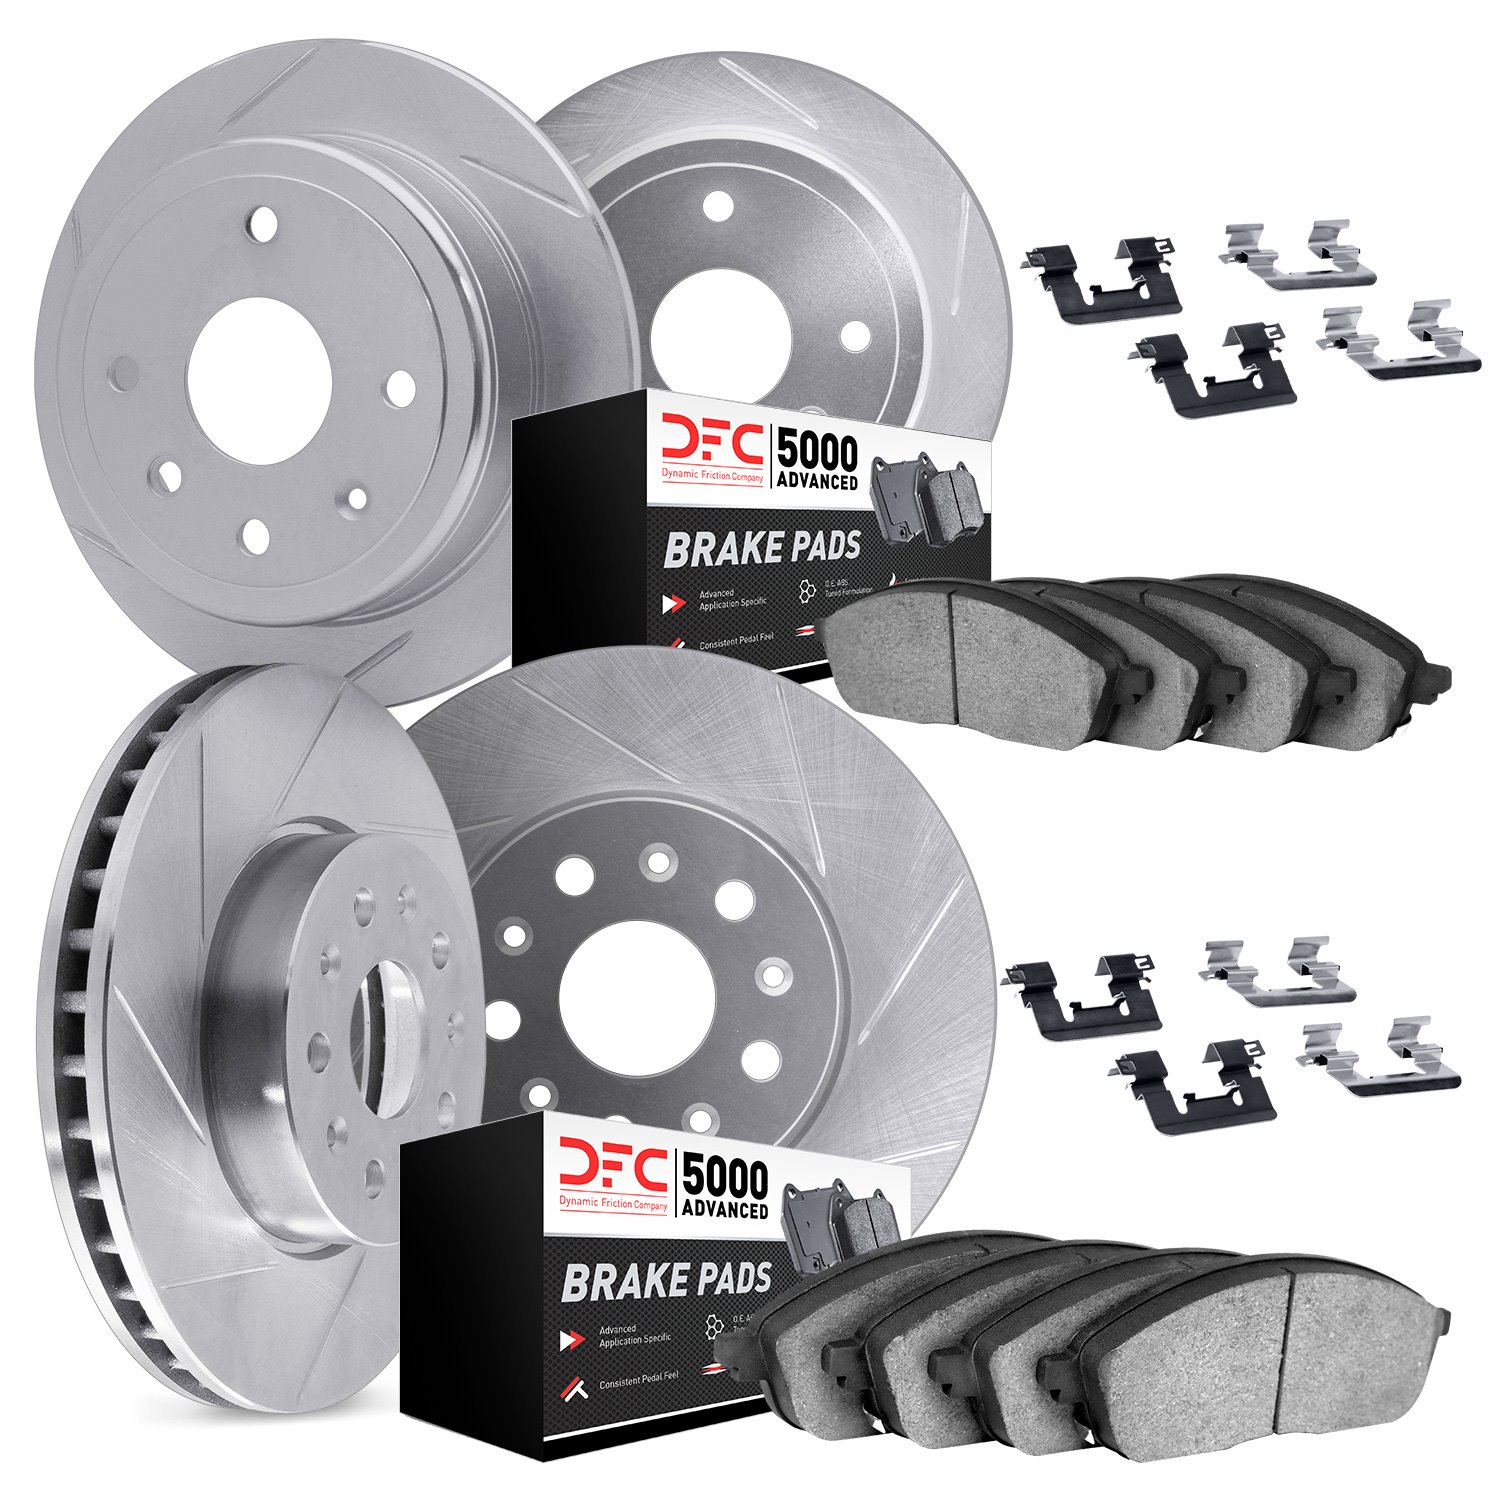 5514-42019 Slotted Brake Rotors w/5000 Advanced Brake Pads Kit & Hardware [Silver], 2015-2020 Mopar, Position: Front and Rear